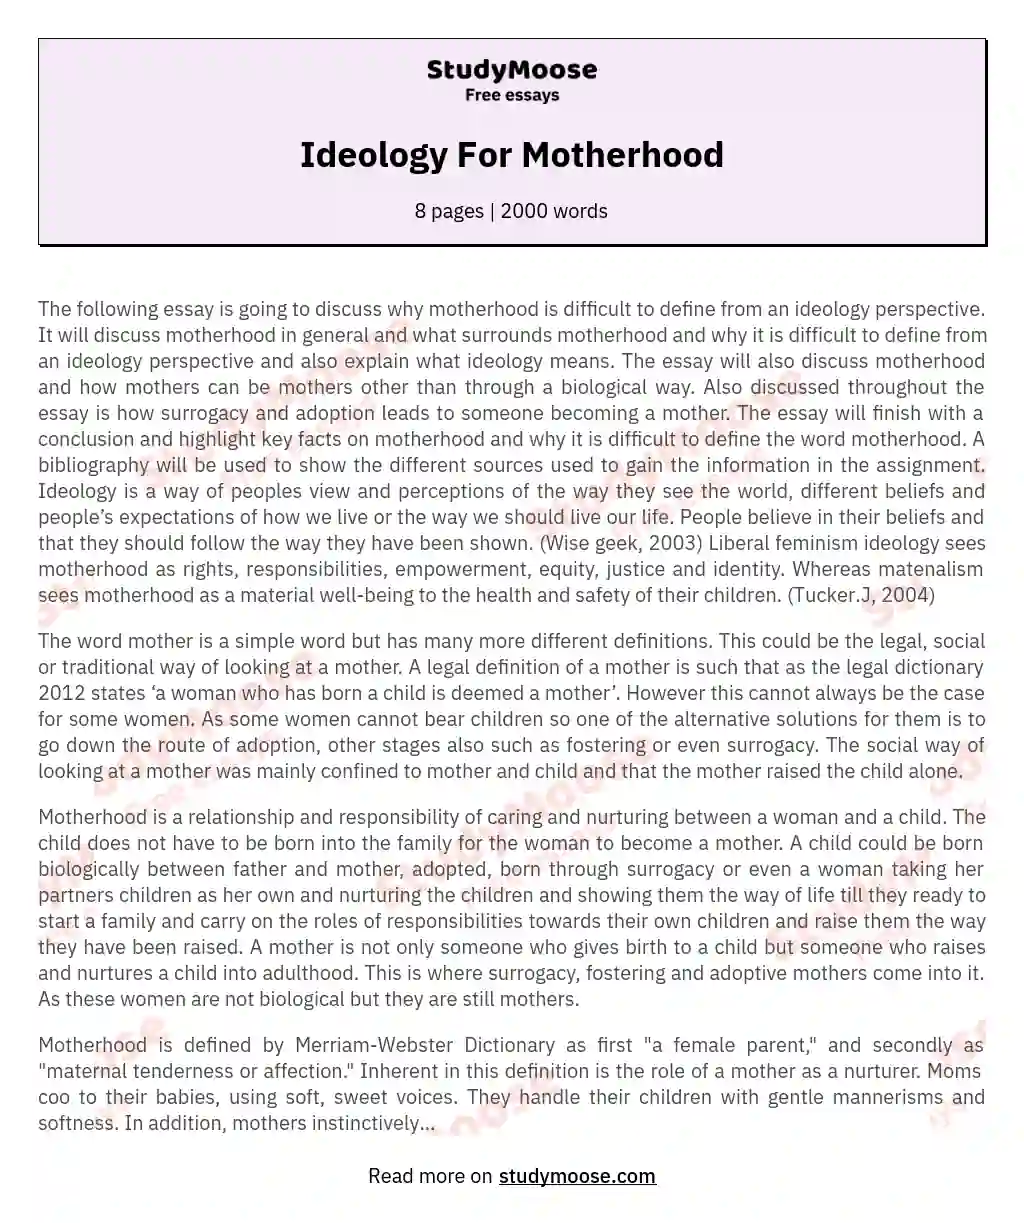 Defining Motherhood: Challenges and Perspectives essay